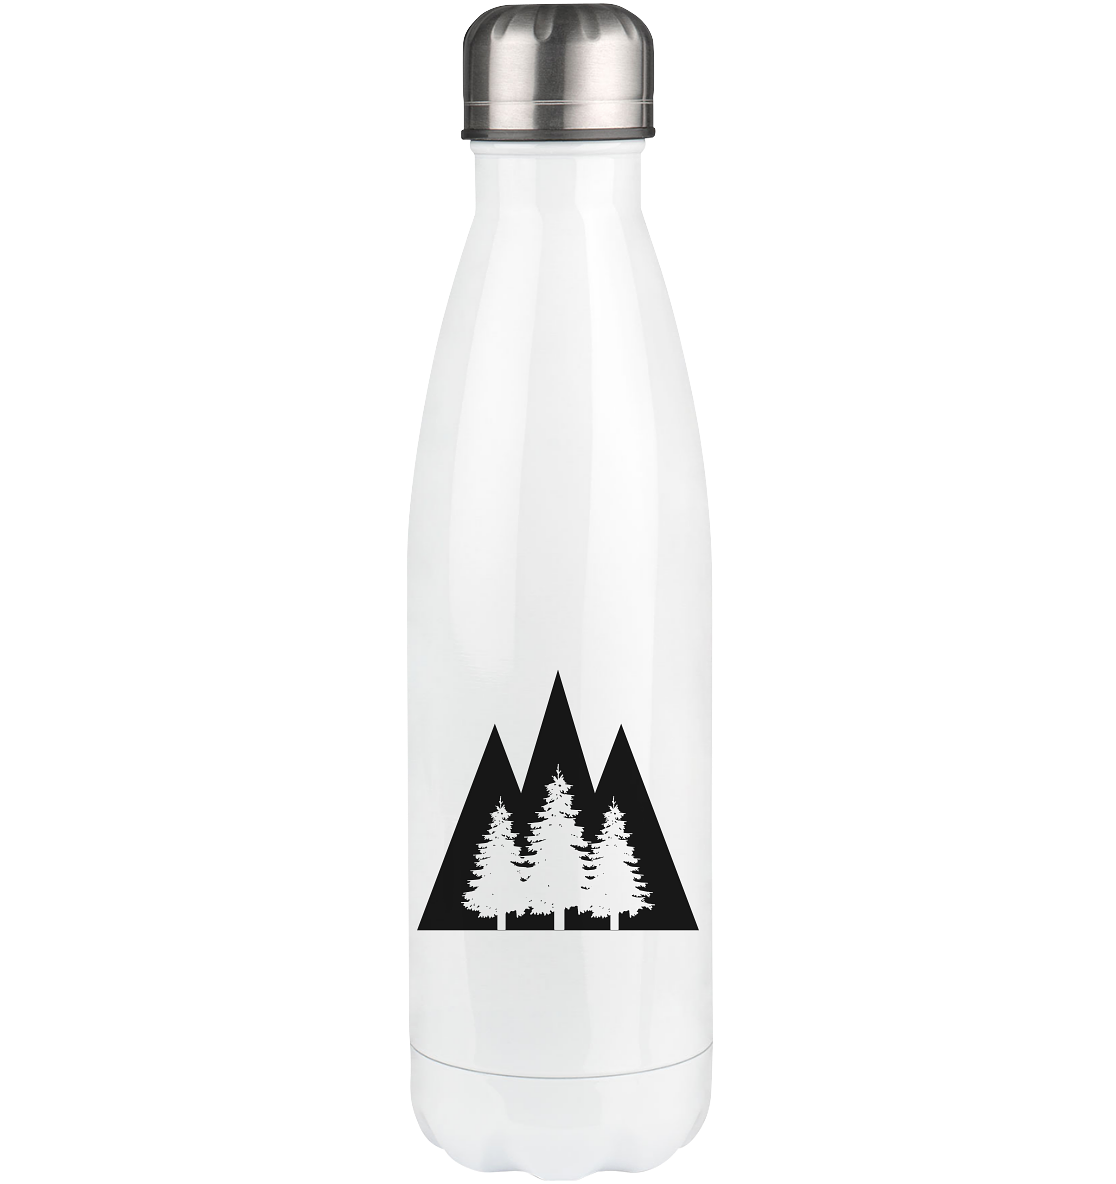 Triangle Mountain and Trees - Edelstahl Thermosflasche camping UONP 500ml